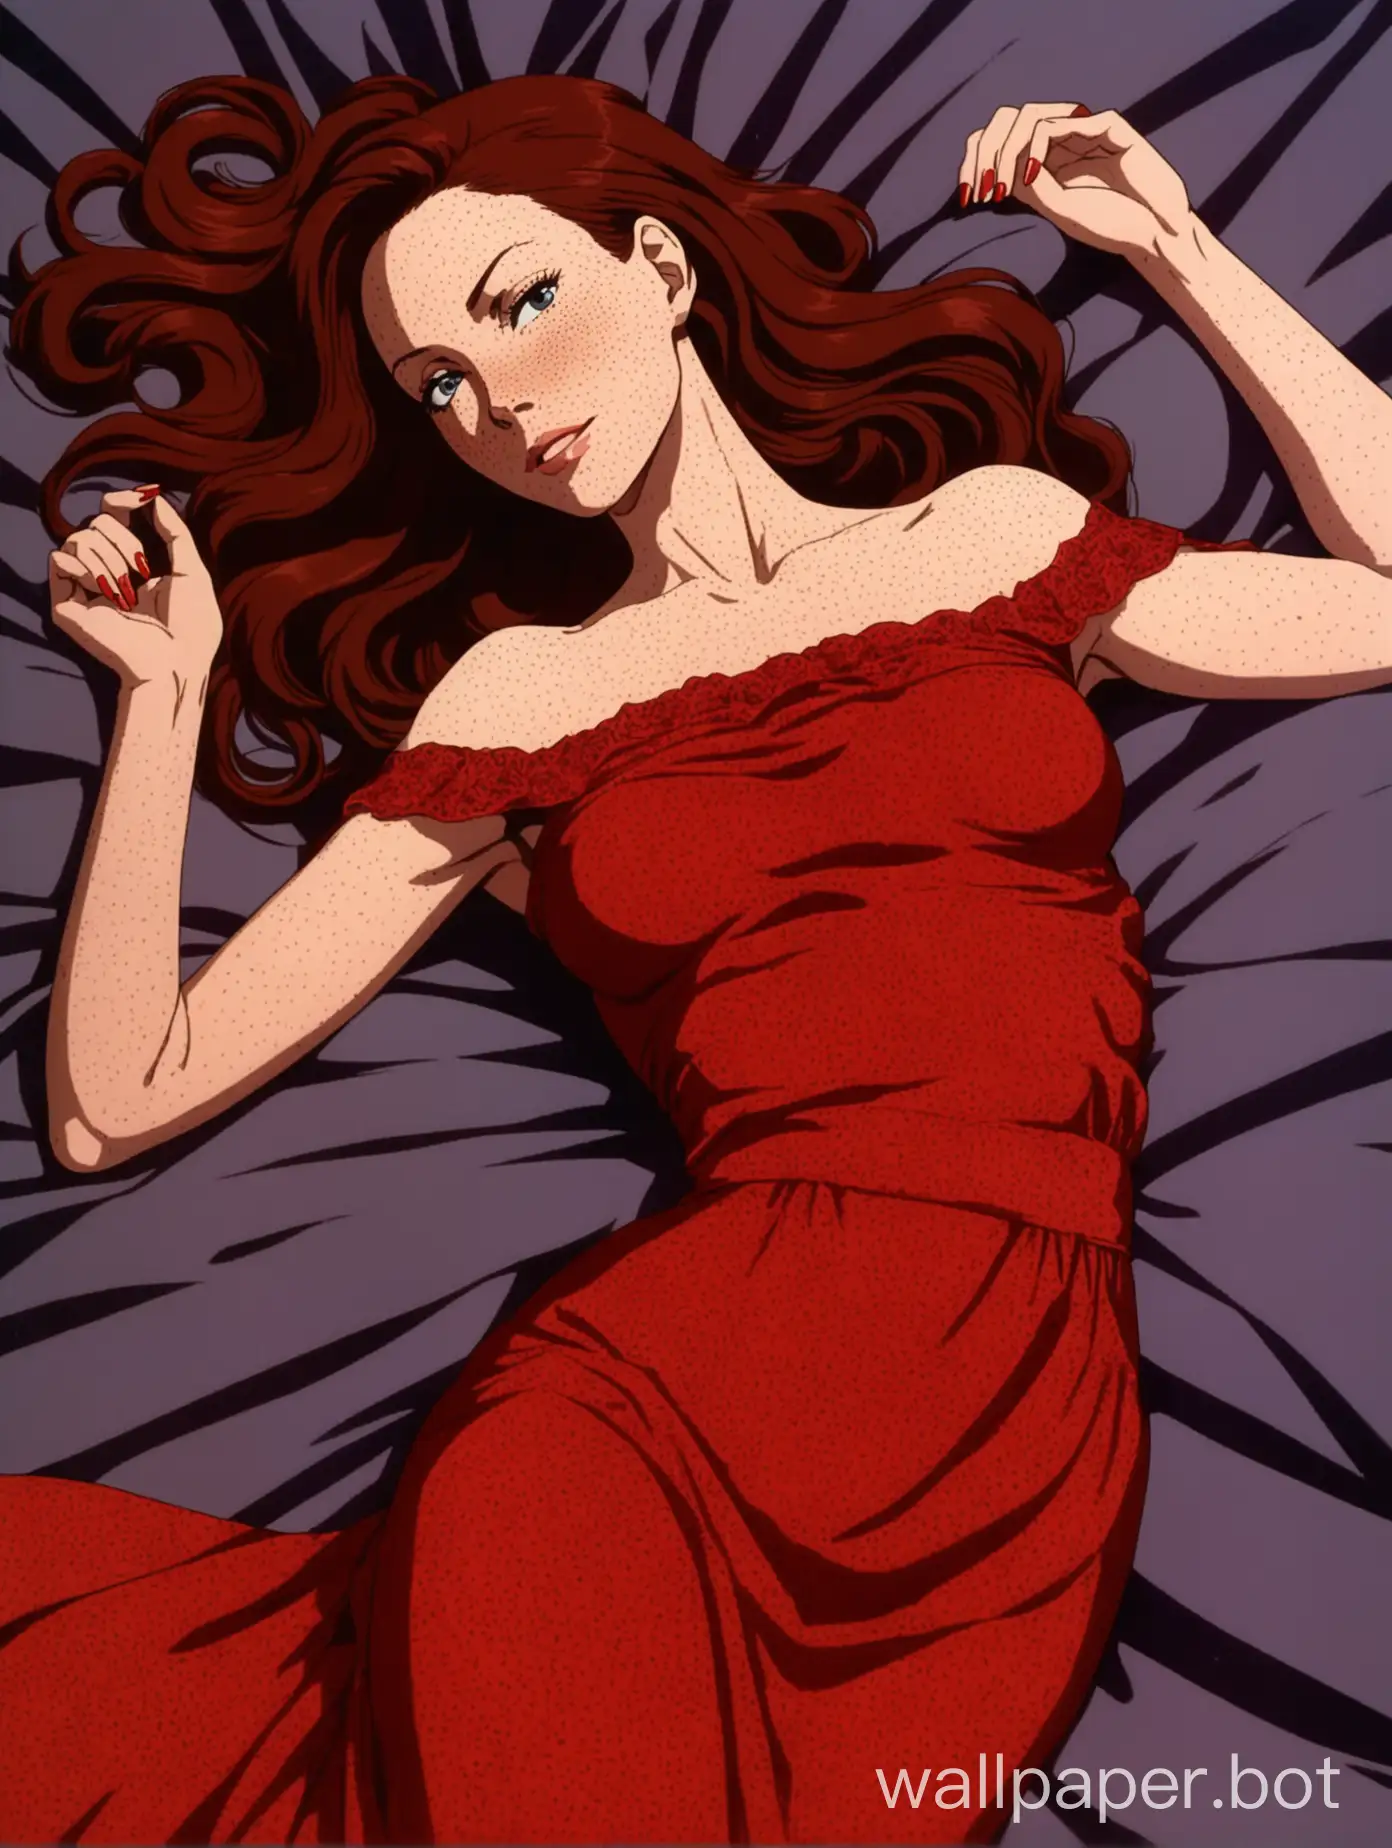 full body view, an attractive 30-year-old woman with long dark red hair, laying on her back, thin and sharp features, pale and Swedish, seductive and youthful, milf, slight smile, freckles, wearing a sheer red off-the-shoulder dress, she looks like Rebecca Ferguson, 1980s retro anime